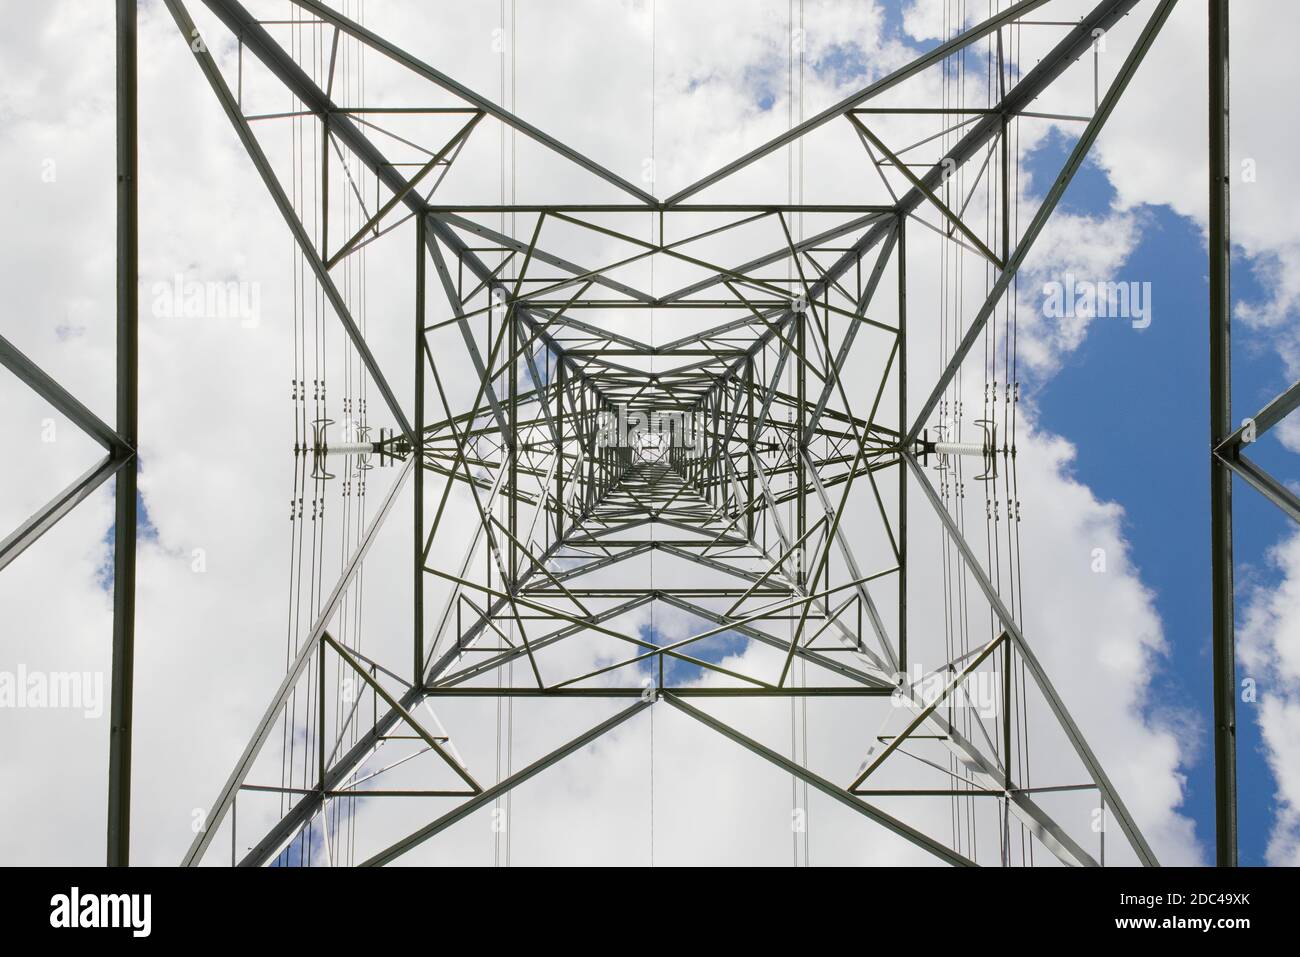 Abstract hard texture from this industrial themed image of an electrical pylon transmission tower. Looking to the sky as the metal converges. Stock Photo